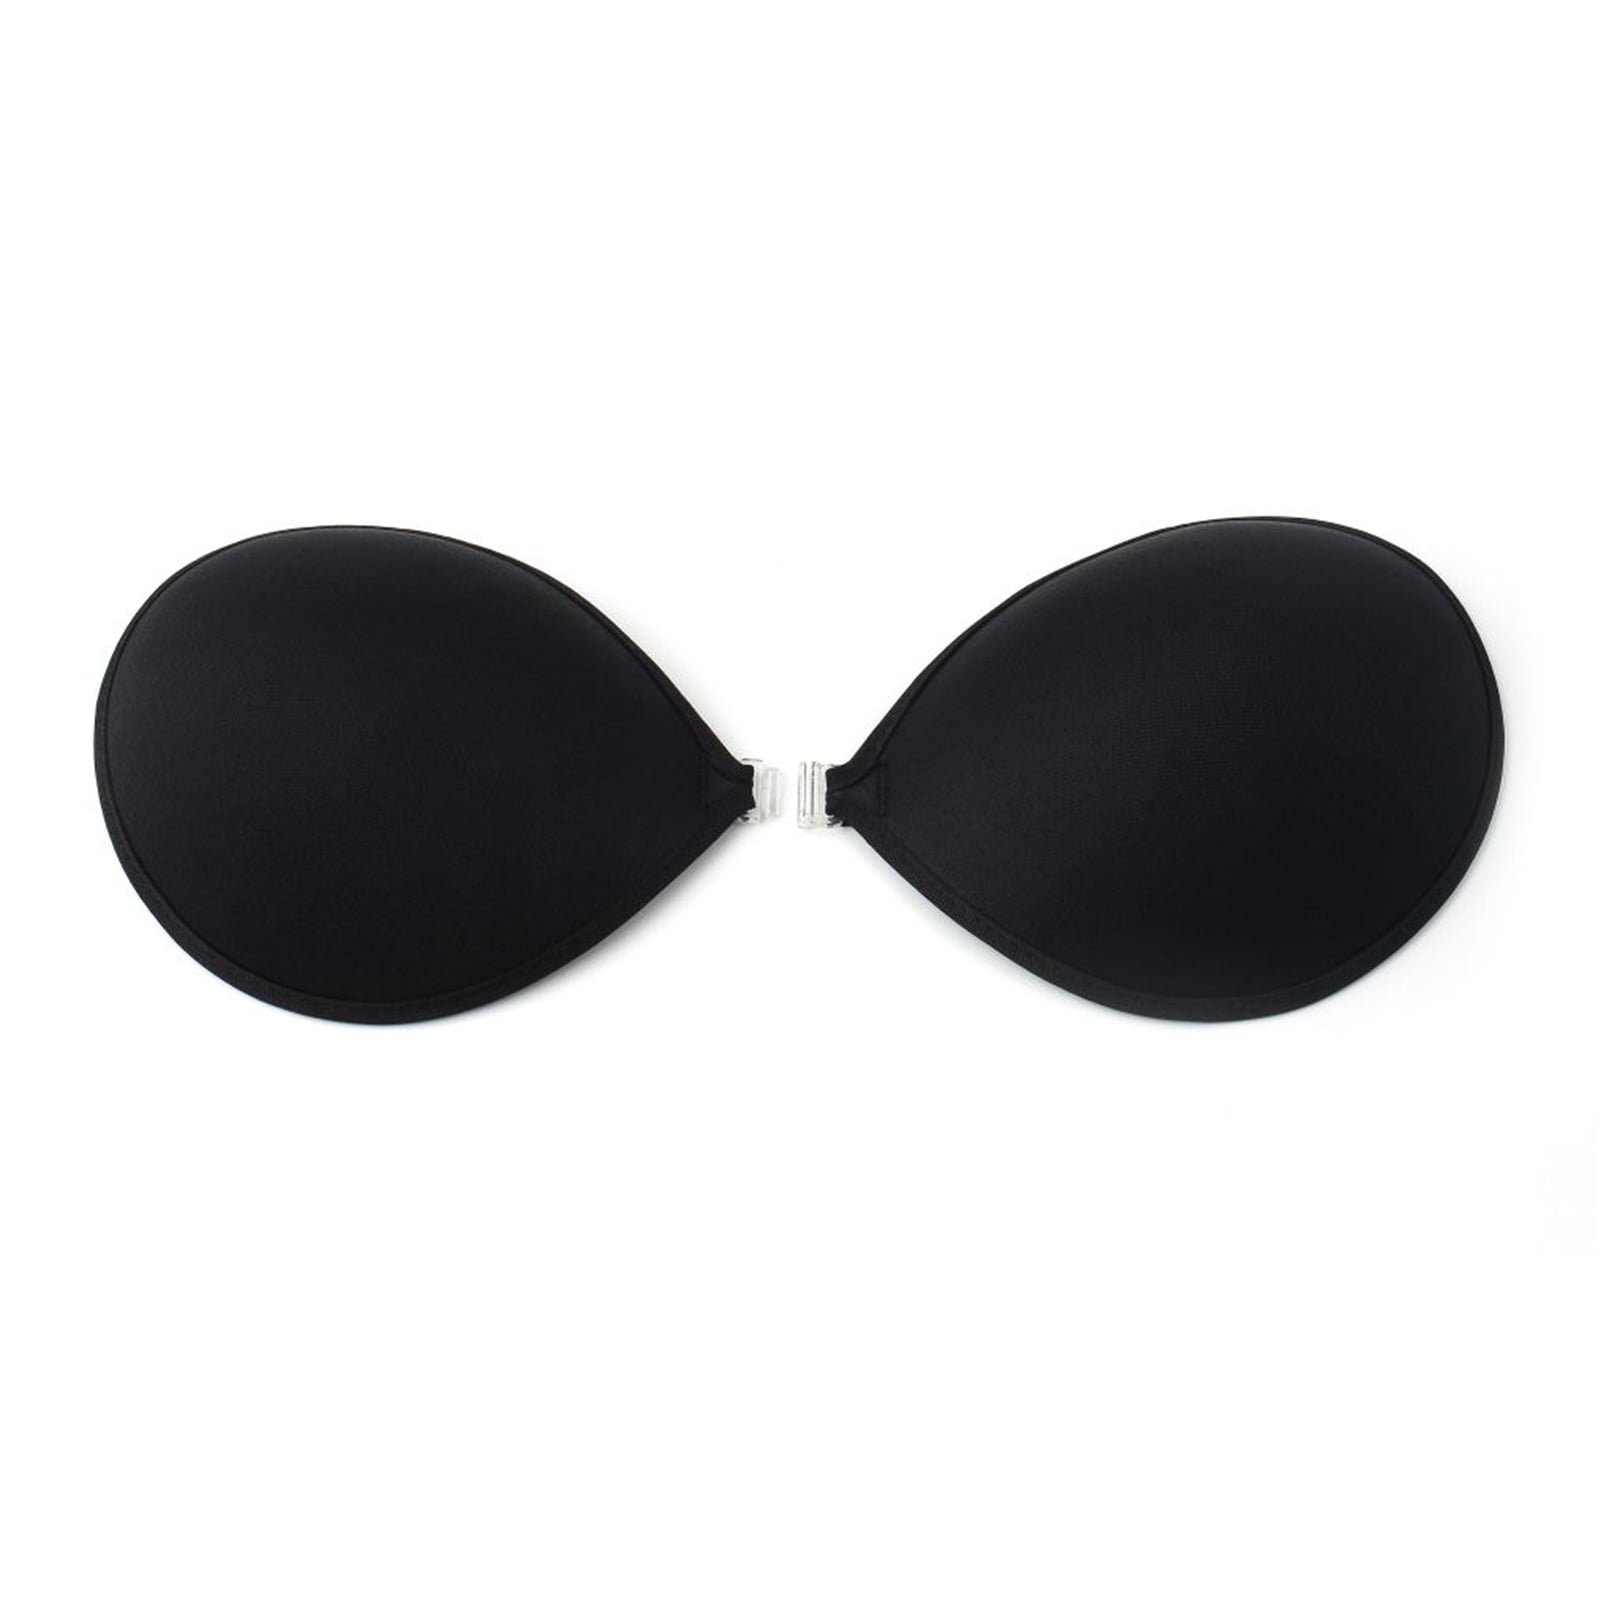 Sexy Butterfly Wing Chest Paste Silicone Bra Self Adhesive, Backless,  Strapless Lingerie For Women Available In A, B, C, D Cup Sizes From  Hui201707, $9.04